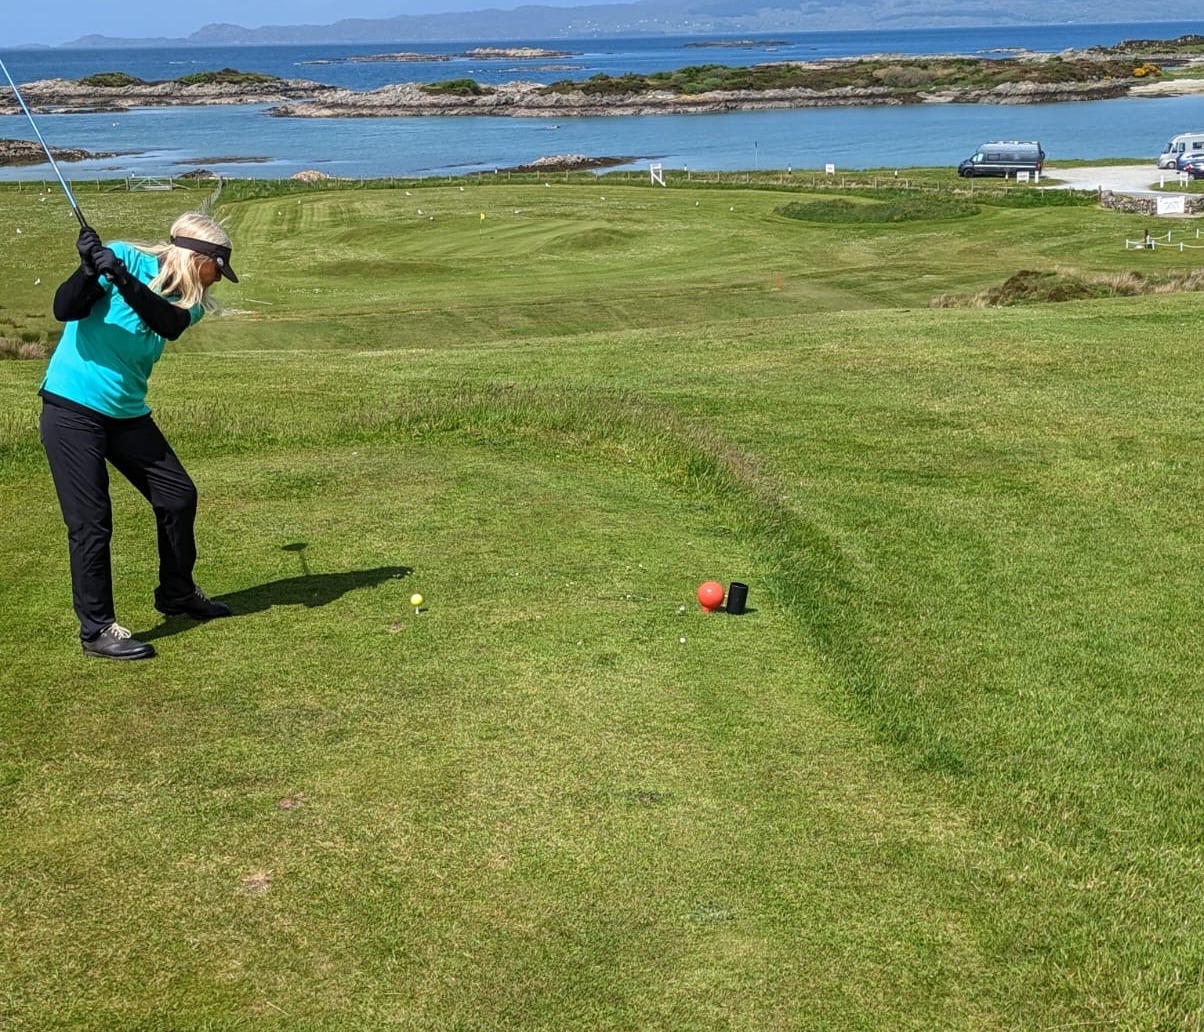 Day 3 - Traigh Golf Club - Most Westerly Course